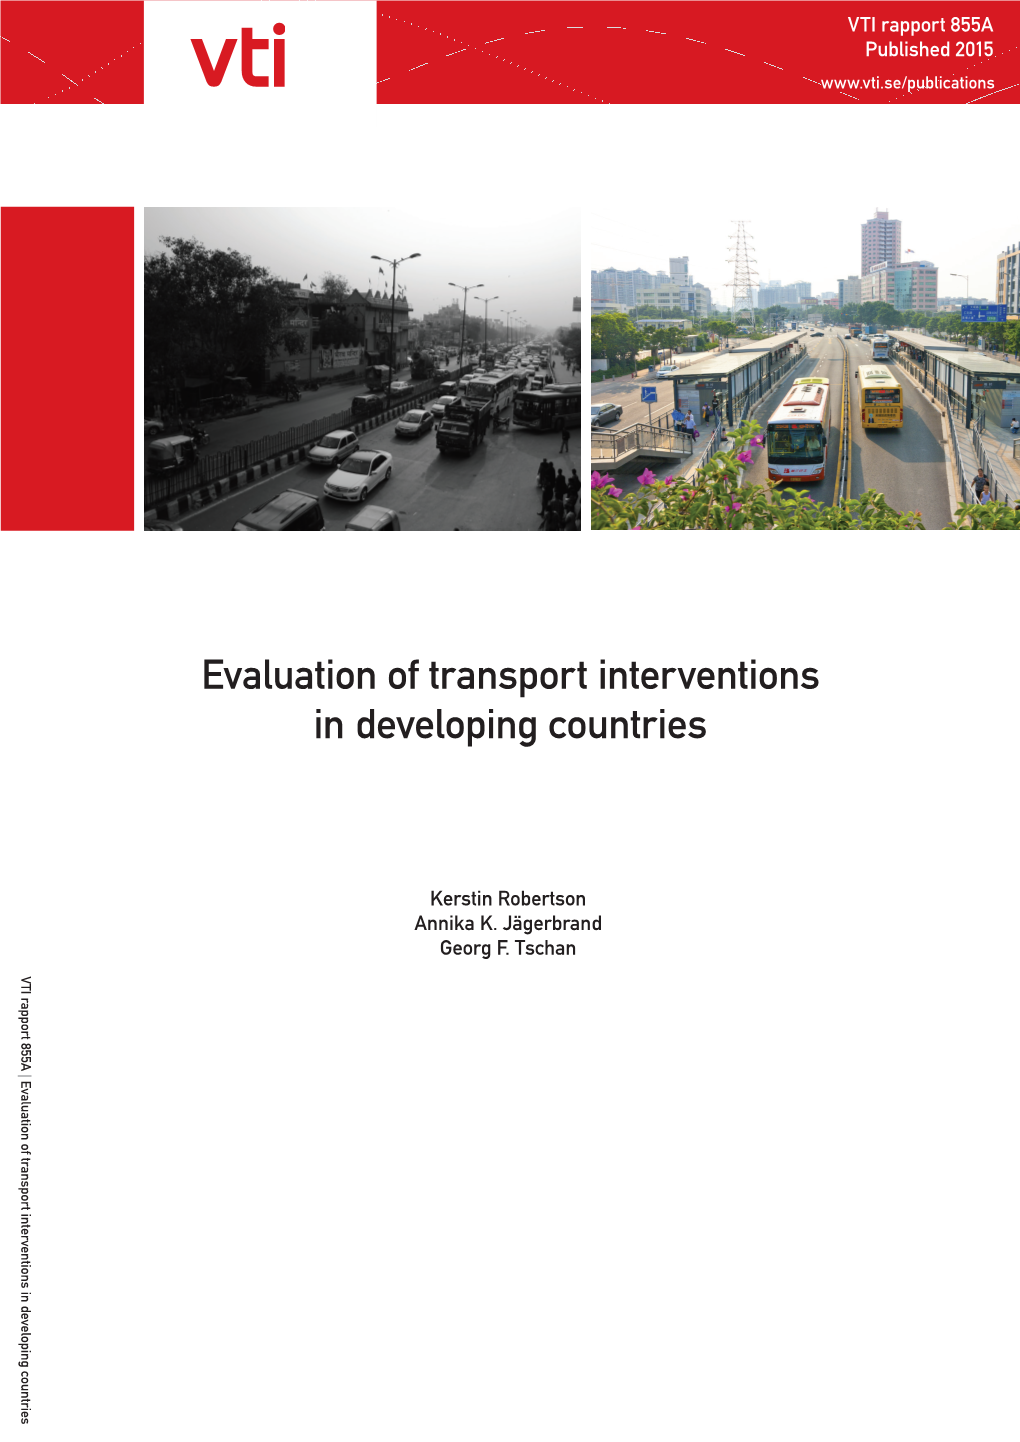 Evaluation of Transport Interventions in Developing Countries